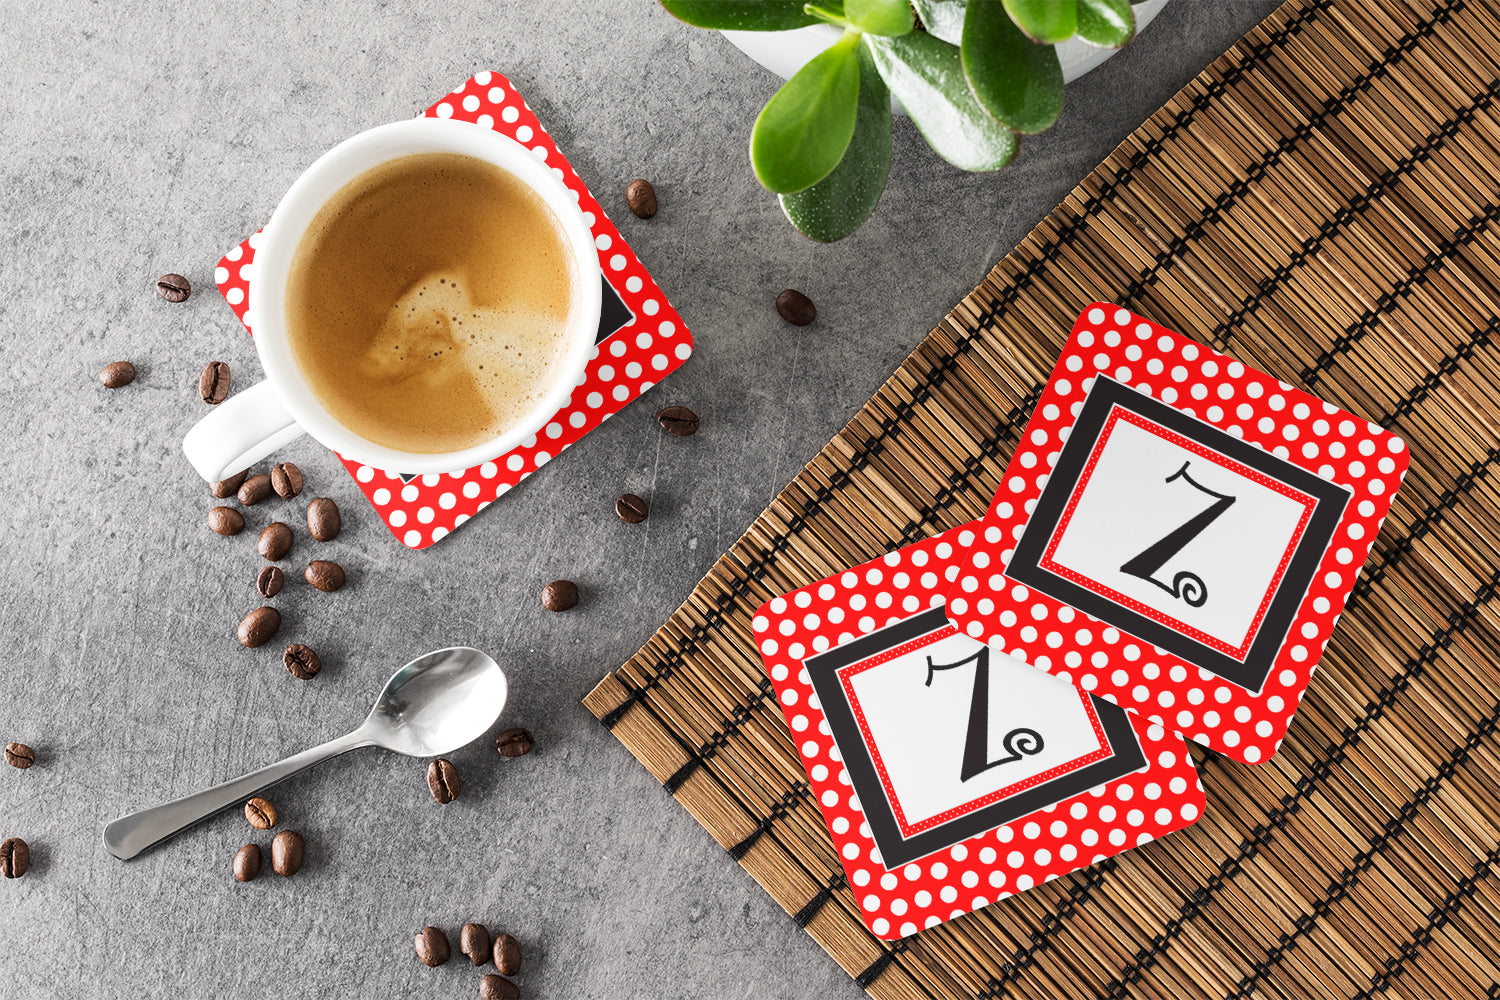 Set of 4 Monogram - Red Black Polka Dots Foam Coasters Initial Letter Z - the-store.com